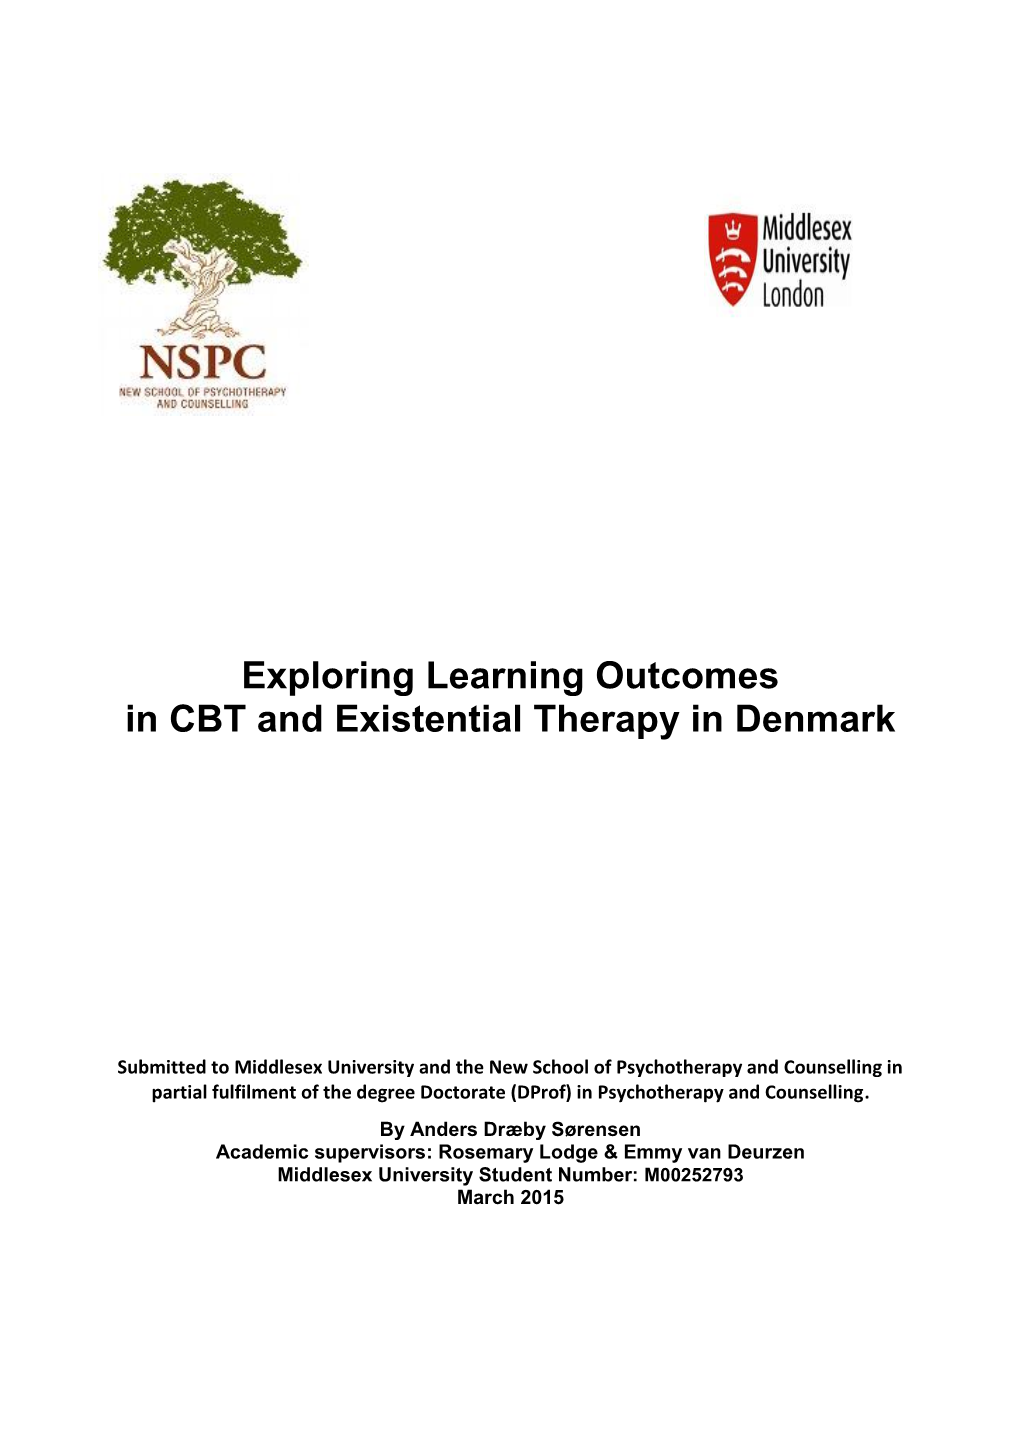 Exploring Learning Outcomes in CBT and Existential Therapy in Denmark